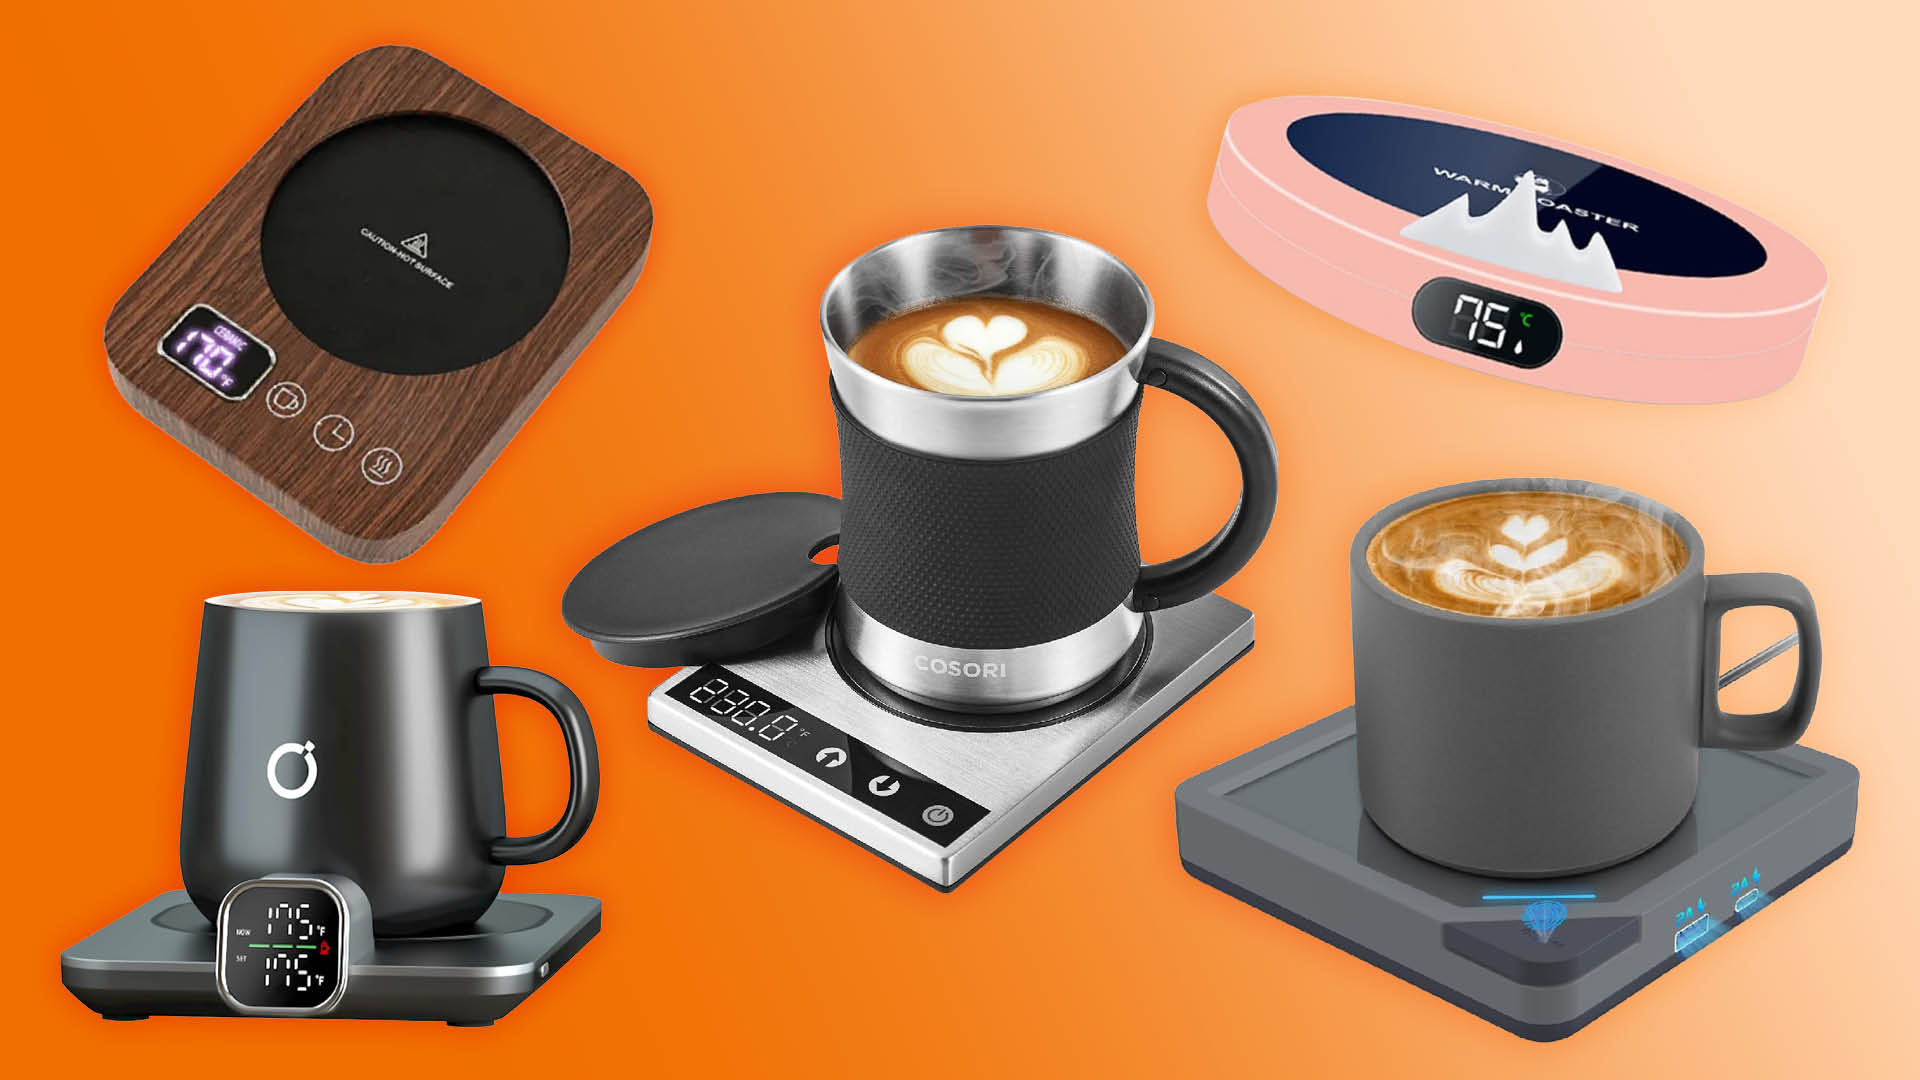 Best Mug Warmers Under $100 To Buy To Keep Your Coffee Or Tea Hot